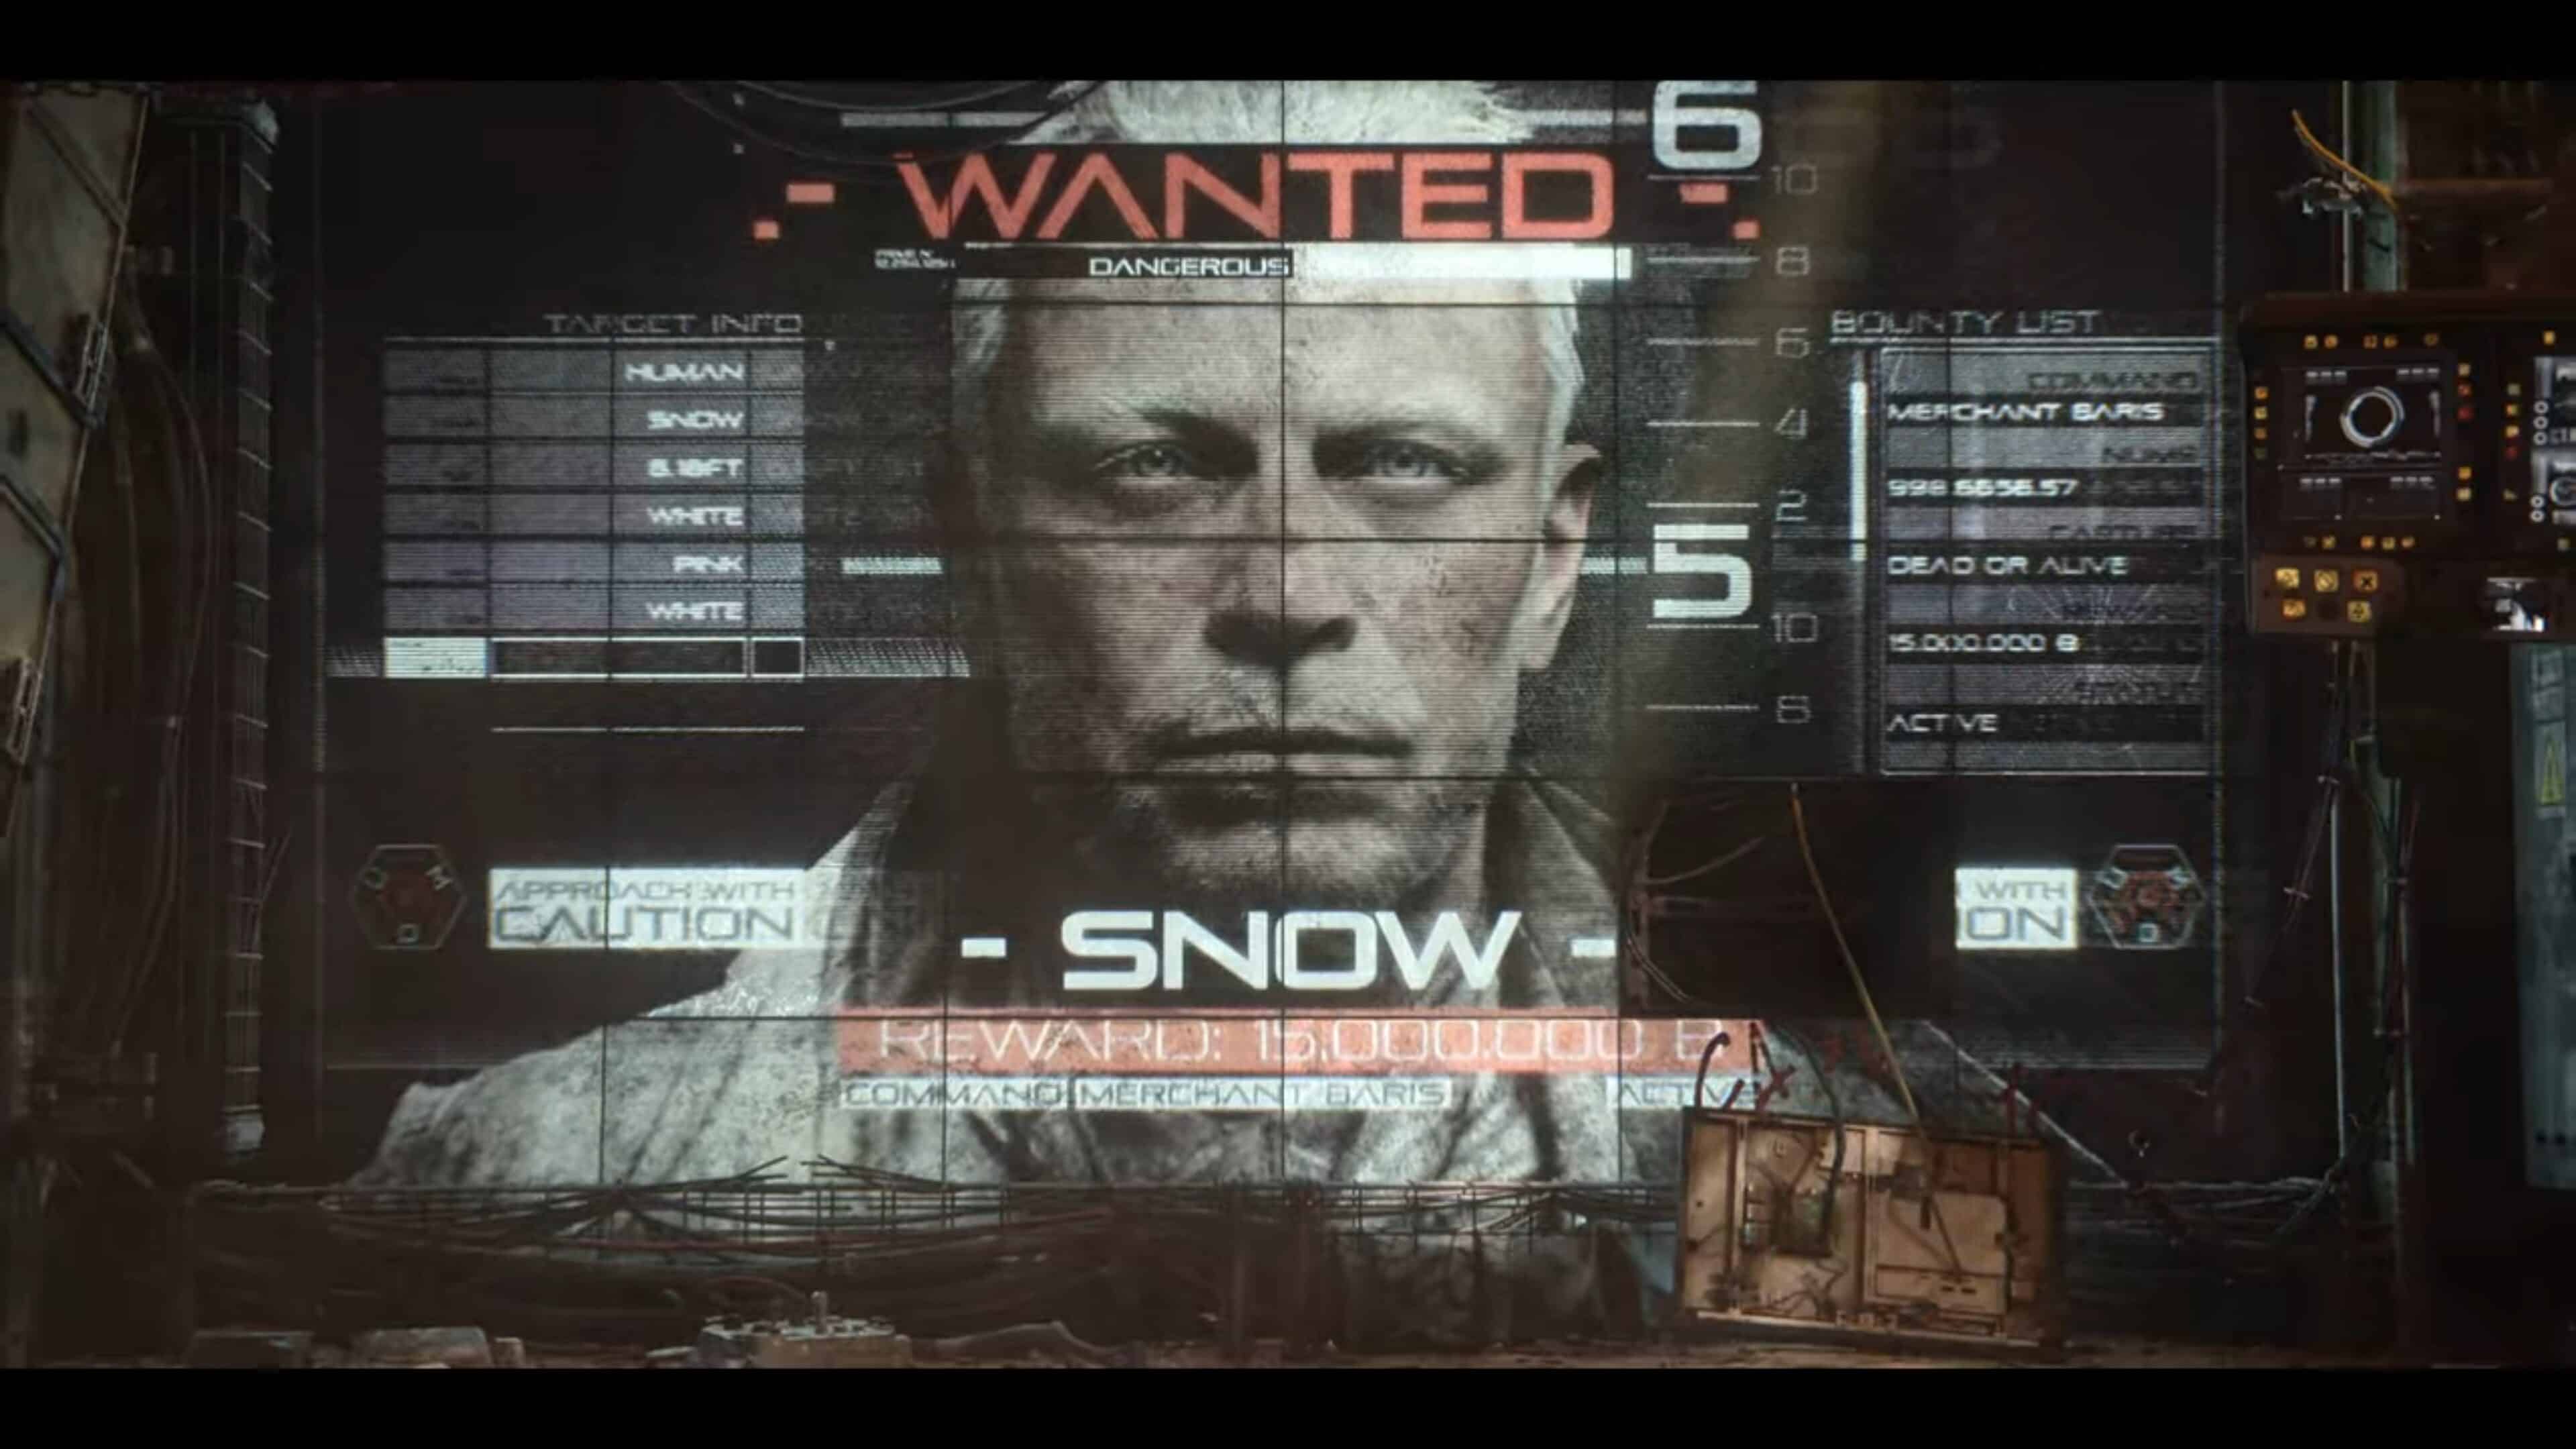 Snow's Wanted Poster